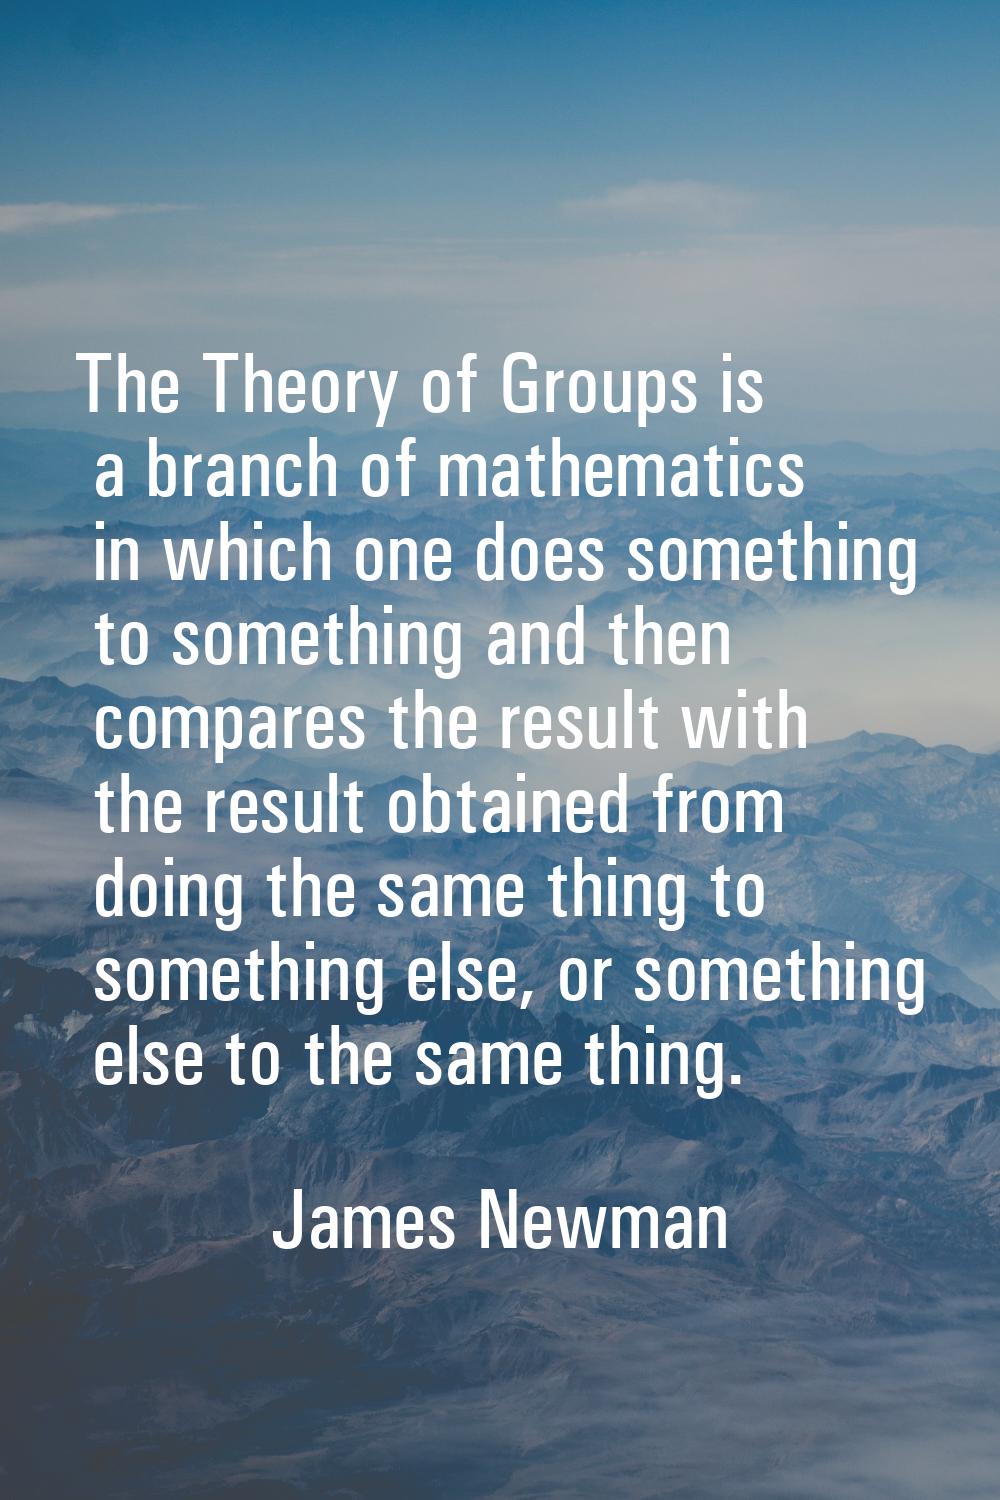 The Theory of Groups is a branch of mathematics in which one does something to something and then c